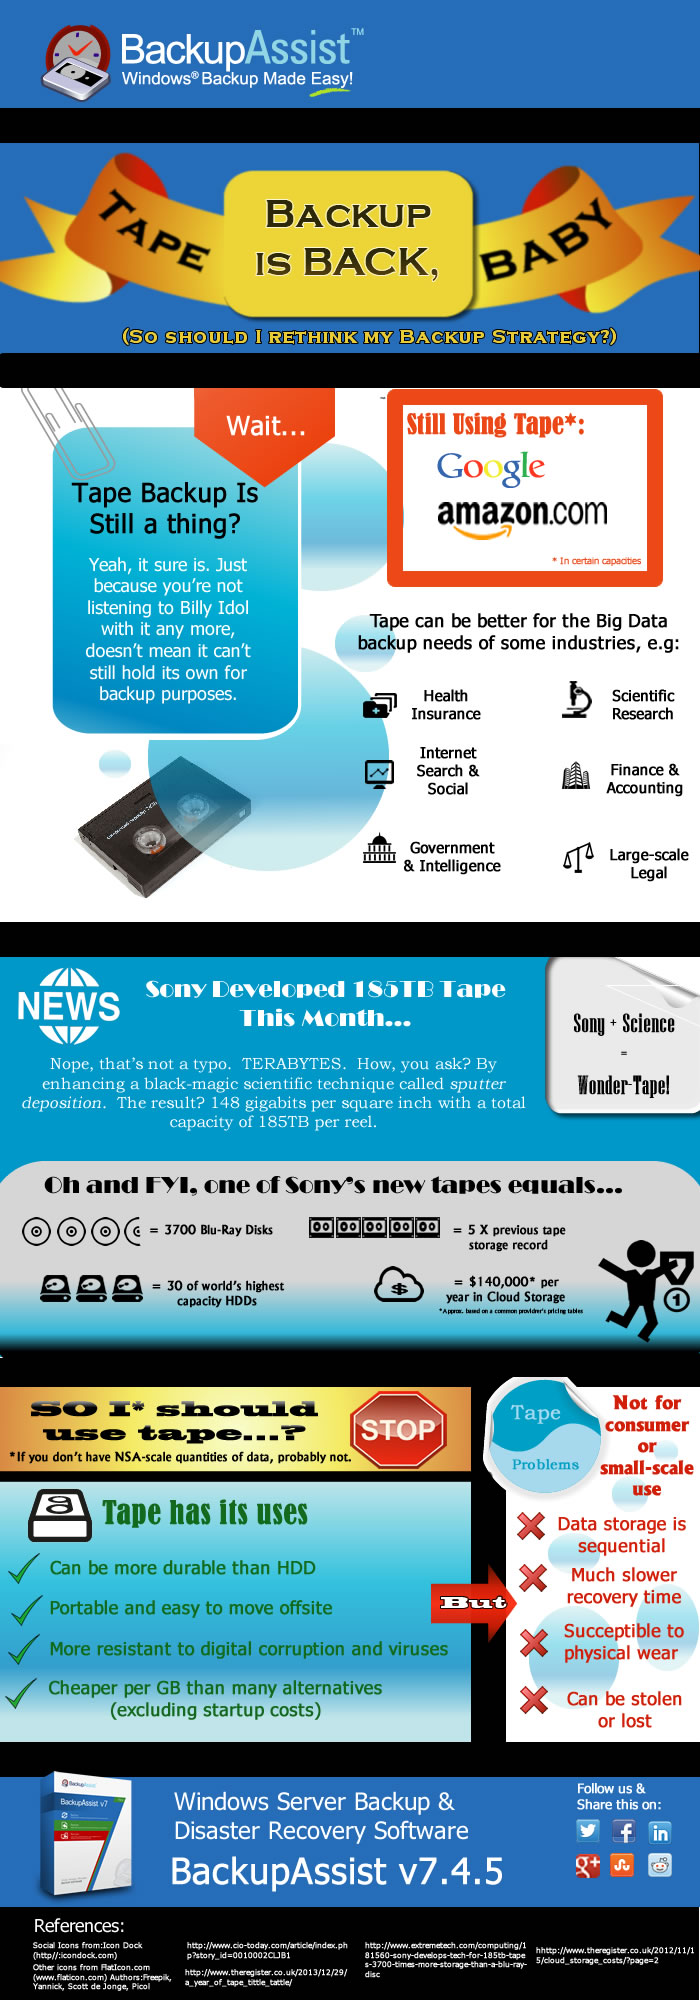 Tape Backup Infographic